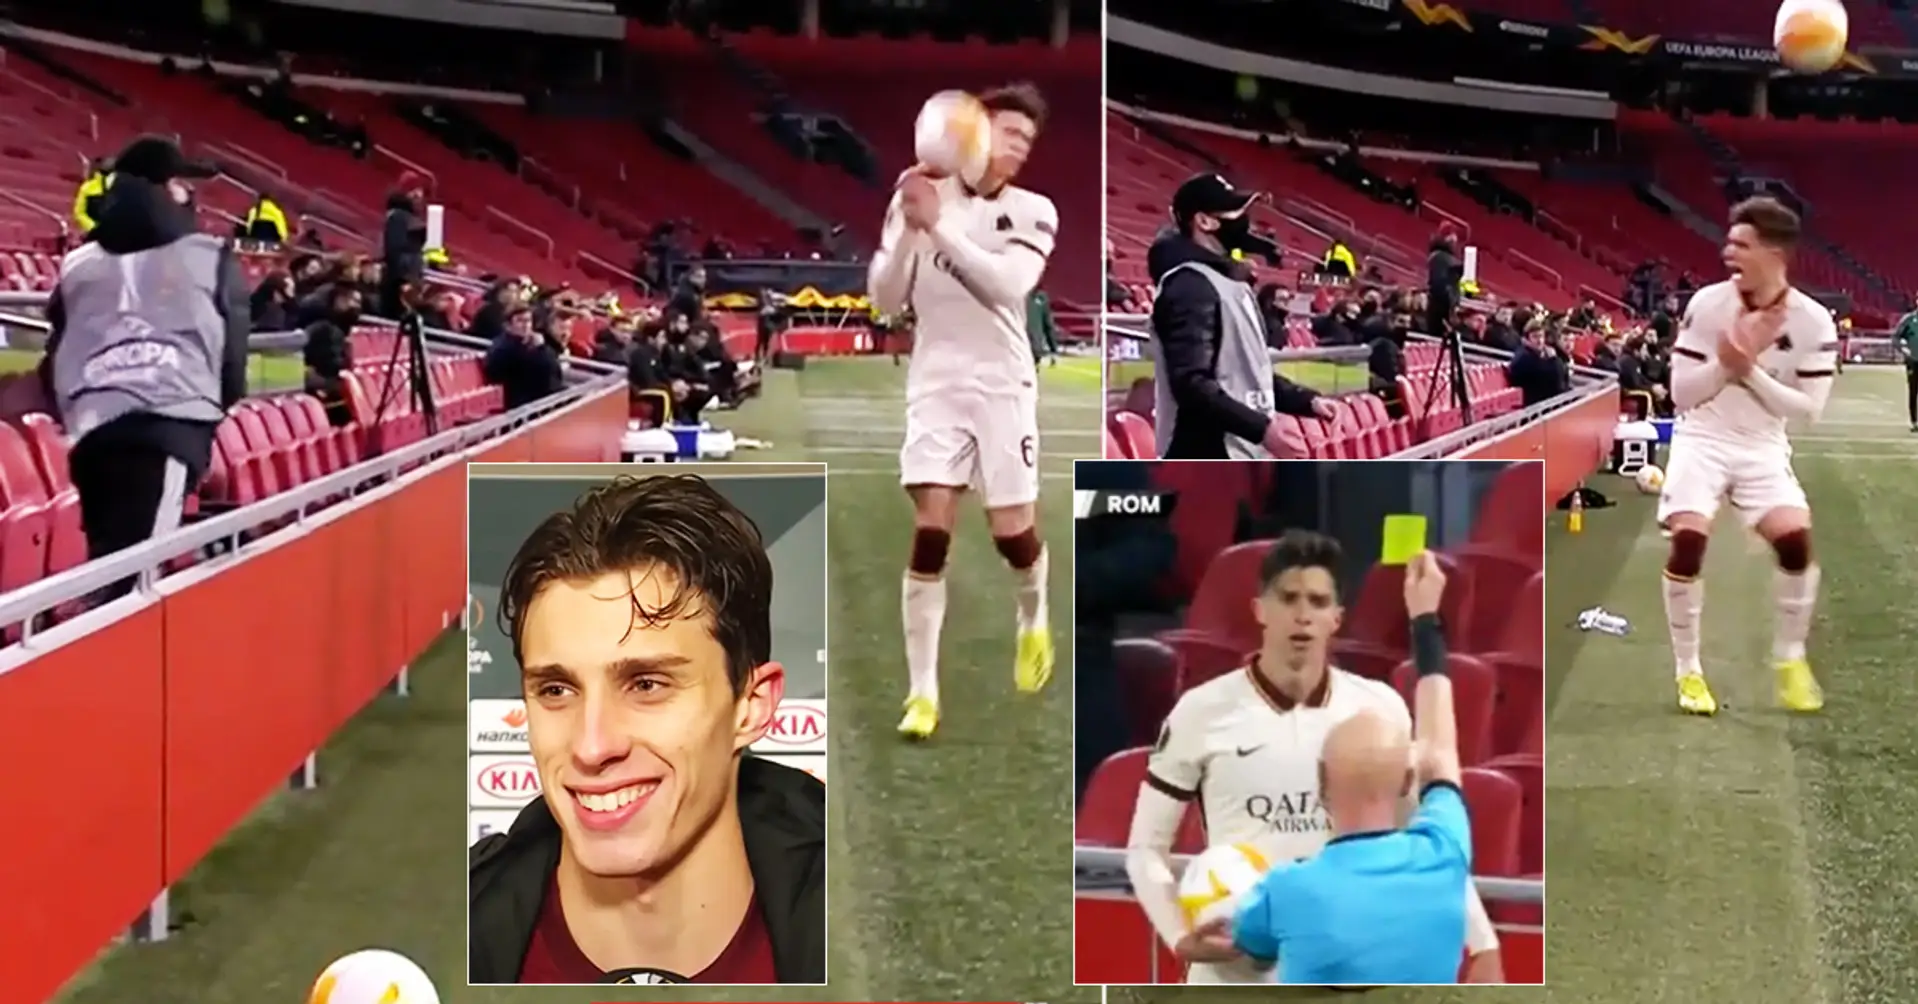 Ajax ball boy throws a ball at Roma star for time wasting. Player replies: 'I understand'